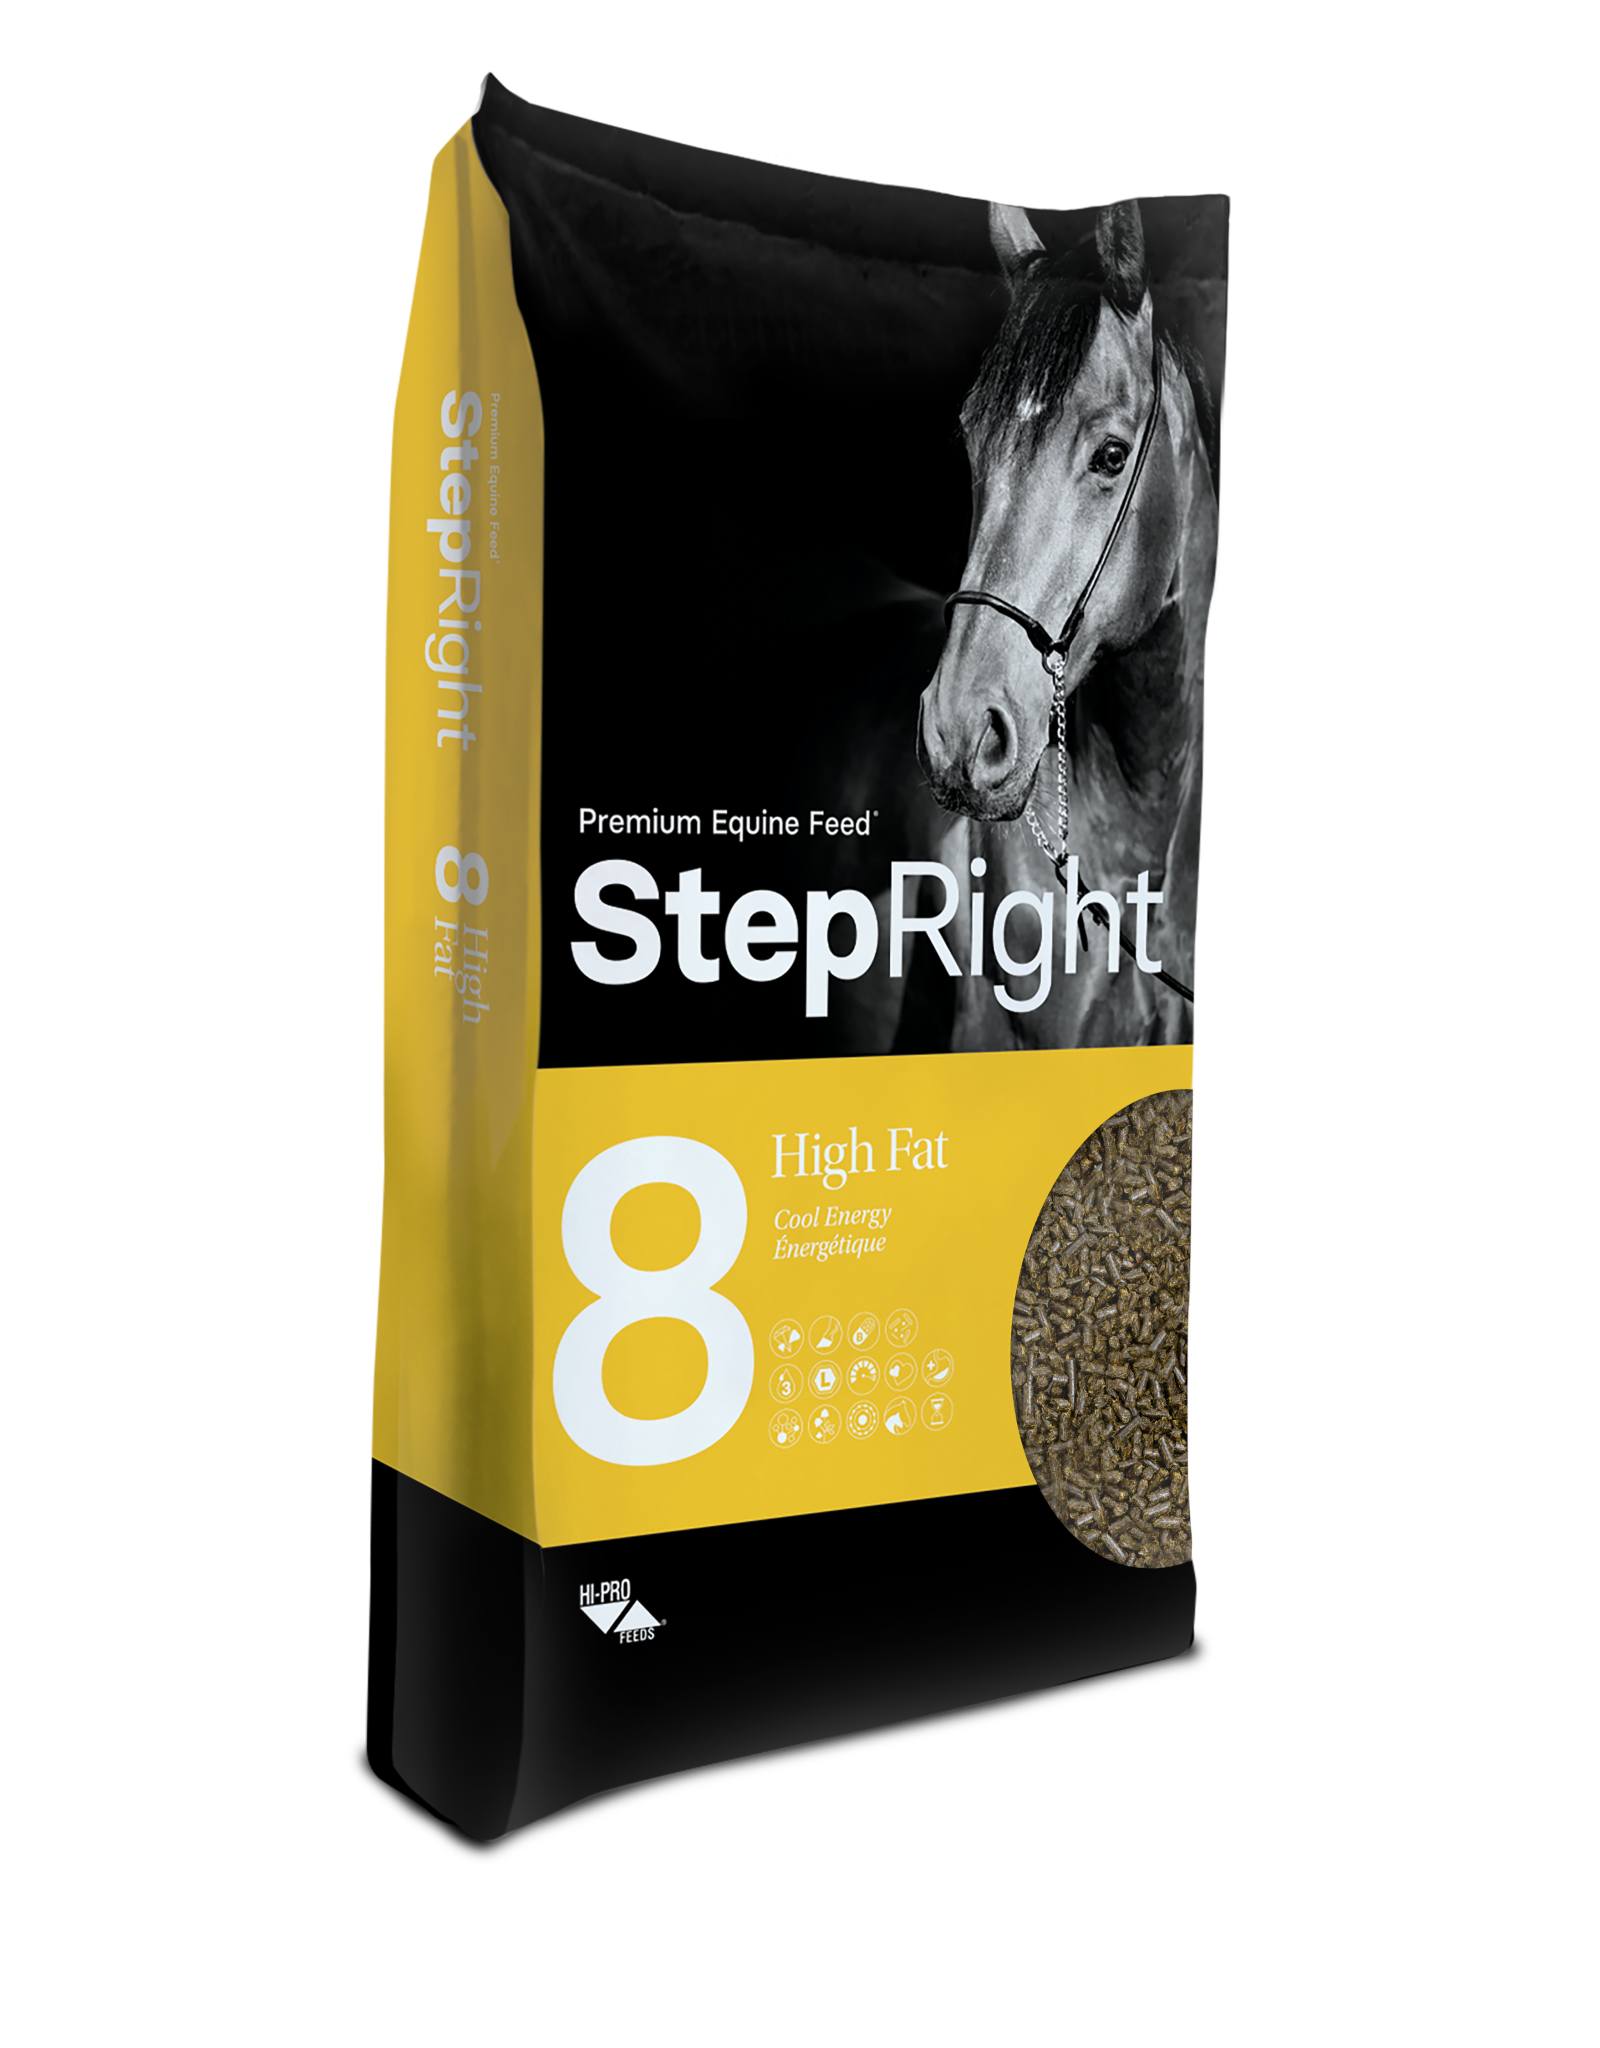 HiPro Feeds (Trouw) NEW* Step Right Step 8 High-Fat 15KG